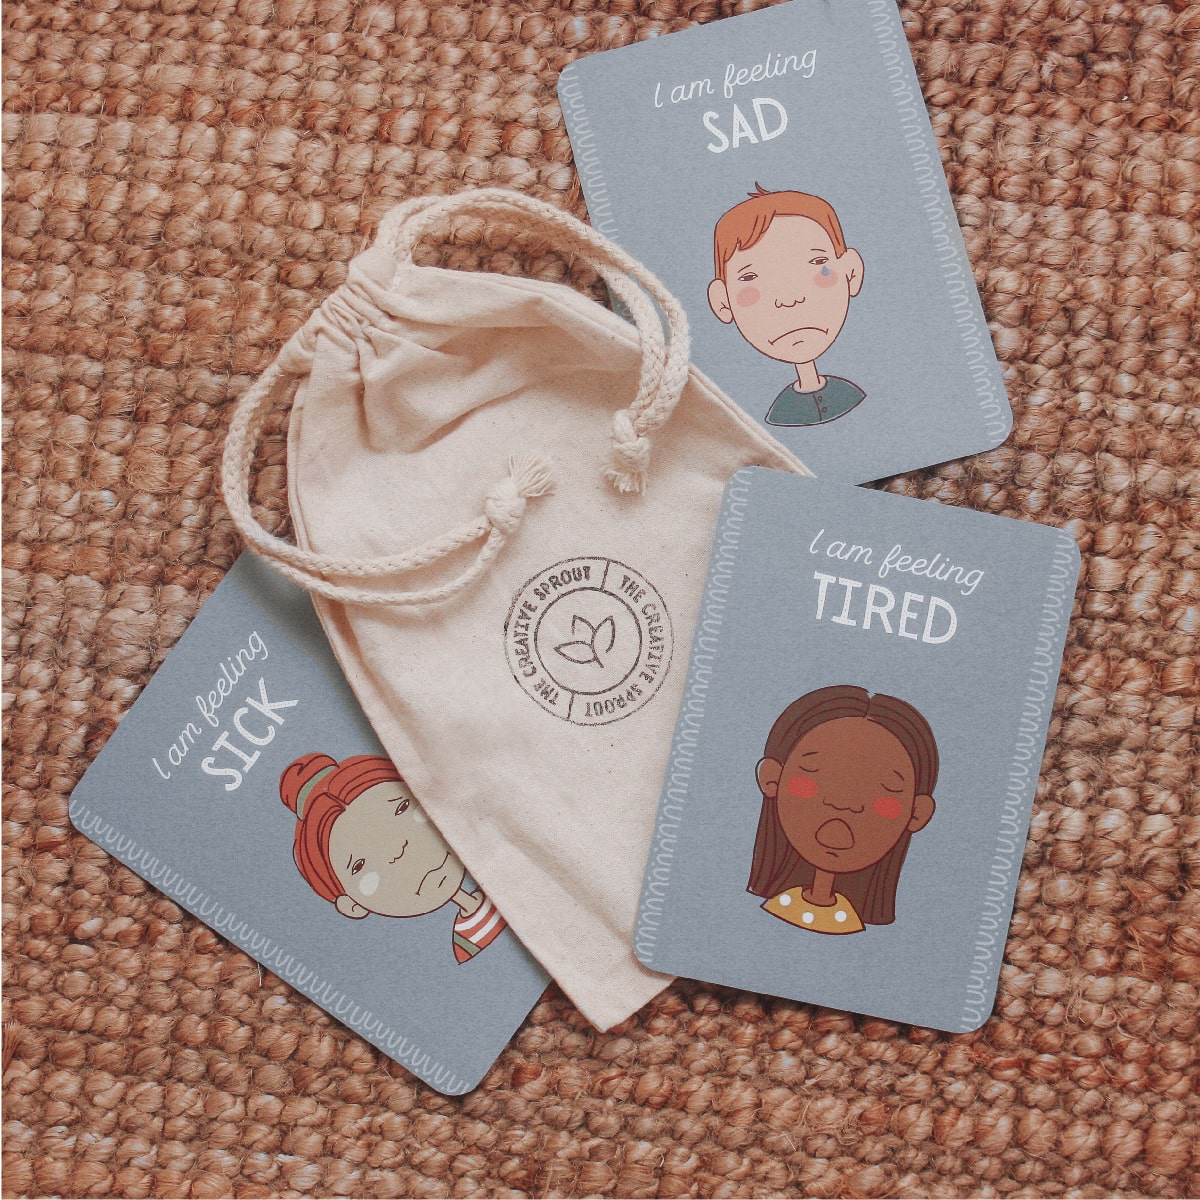 calm corner cards on floor to help with emotional intelligence for kids